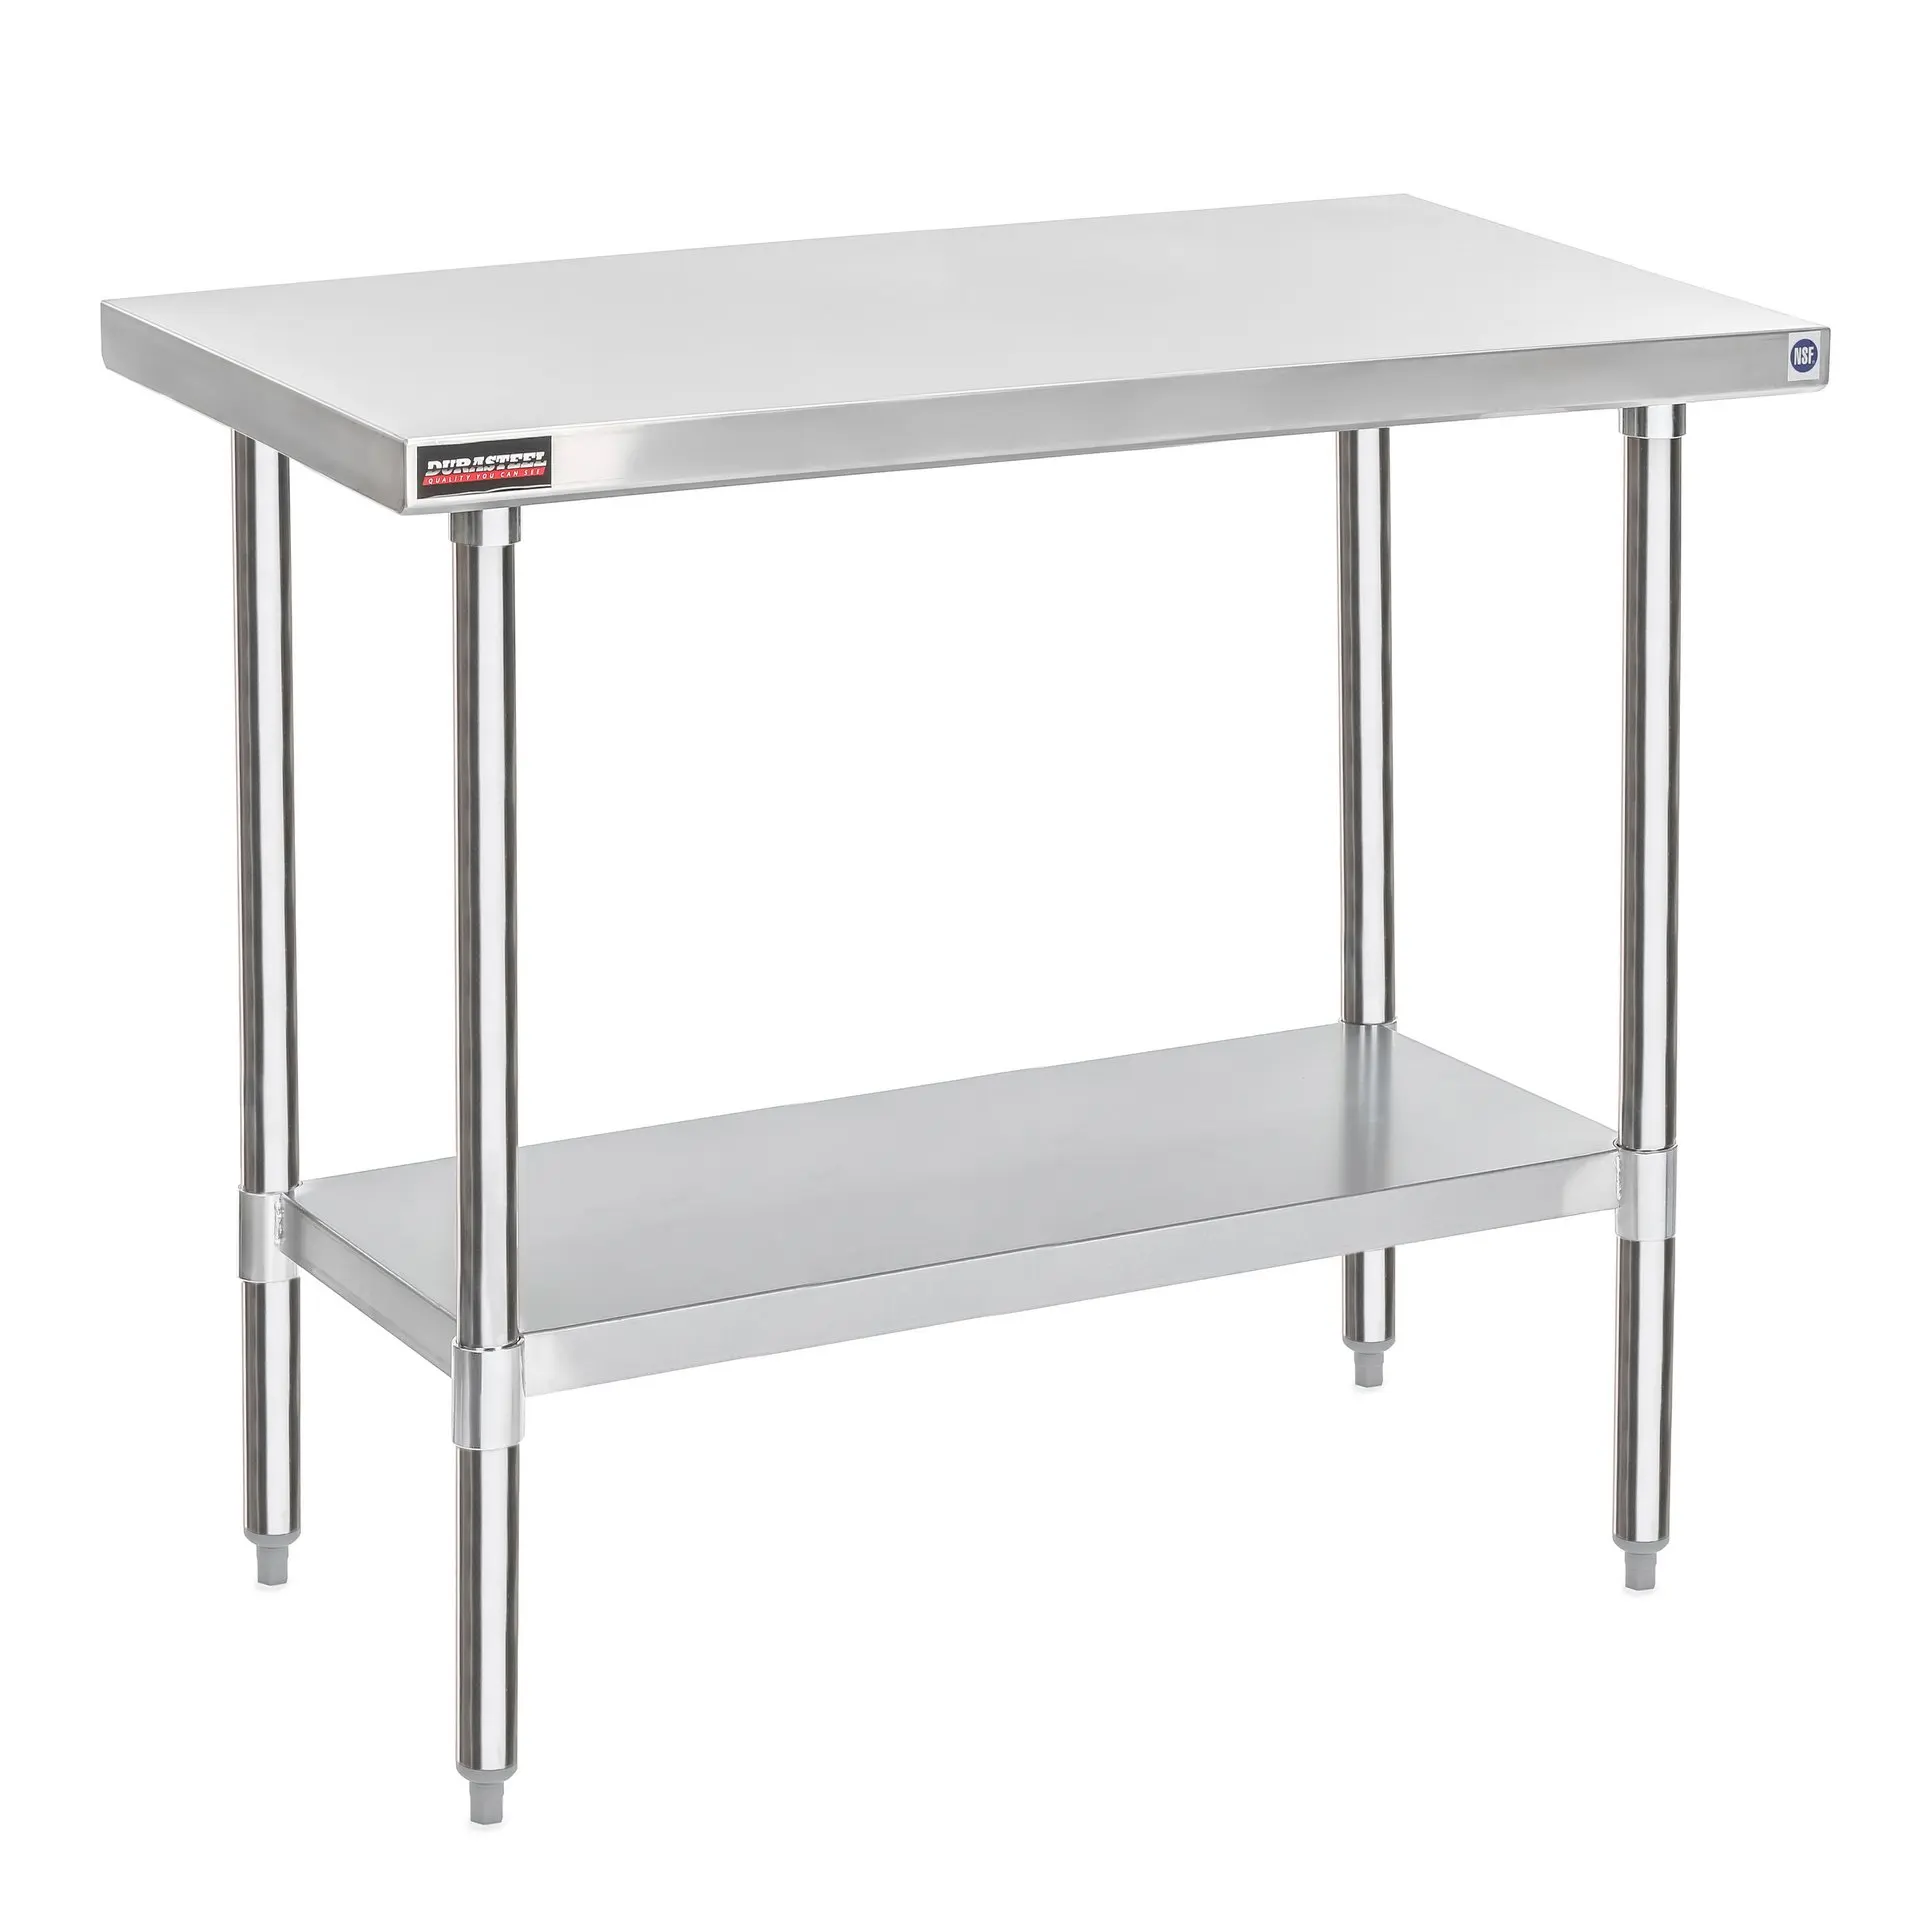 Laundry Janitorial Room Garage Bar Or Other Commercial Setting Cafeteria 24 X 48 Stainless Steel Kitchen Work Table Commercial Restaurant Table For Cafe Restaurant Kitchen Restaurant Industrial Scientific Food Service Equipment - amazoncom stimhwhh roblox video game aluminum outdoor